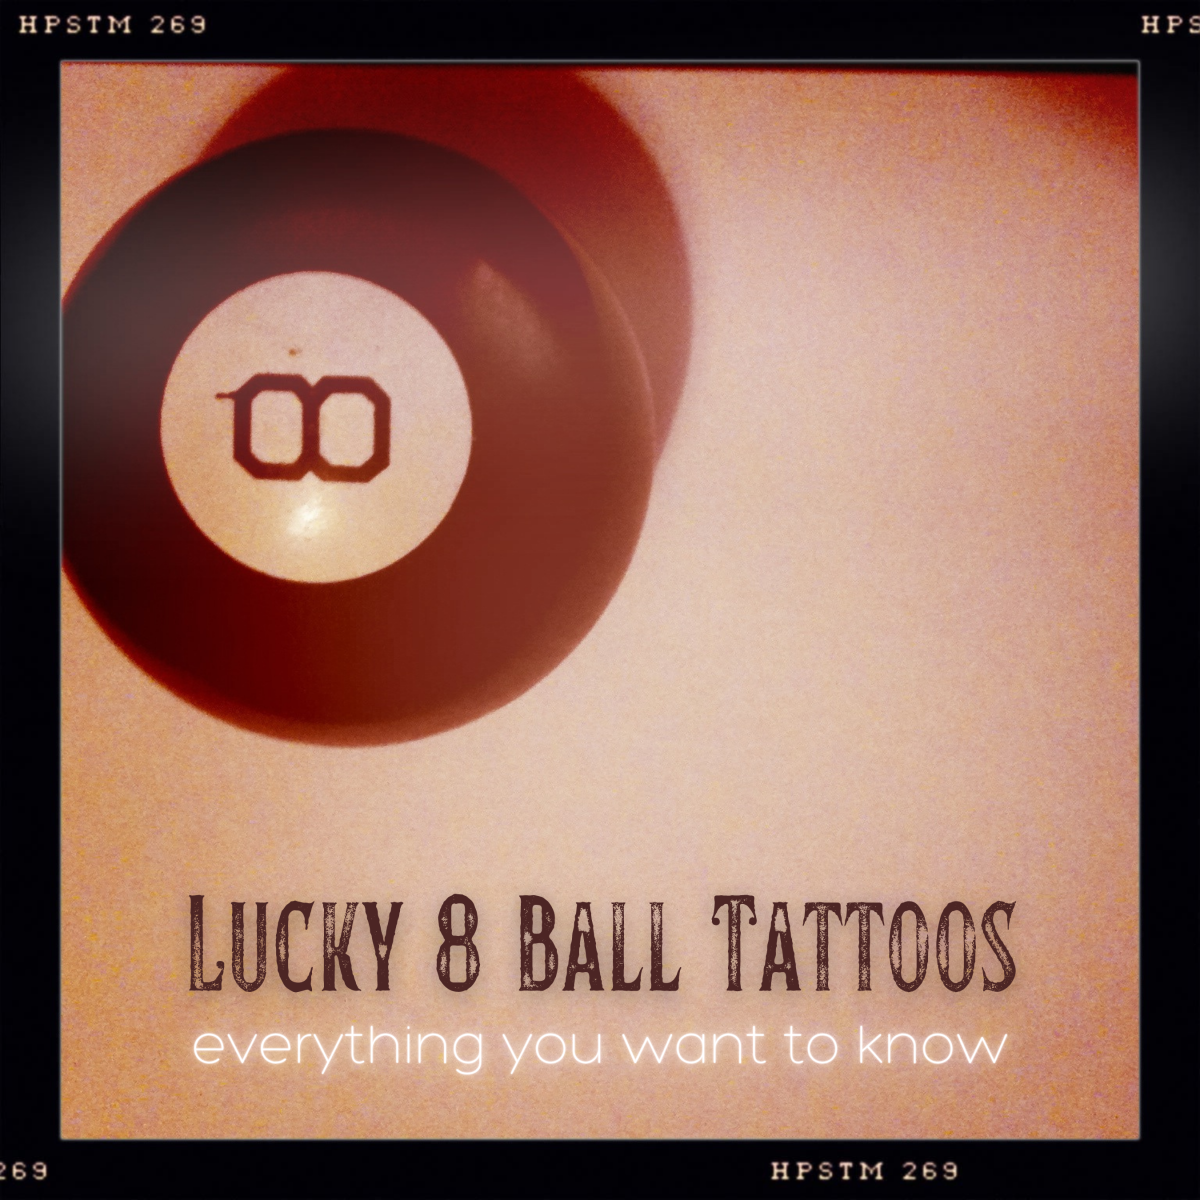 Learn what an 8-ball tattoo means & find many great eightball tattoo design ideas.